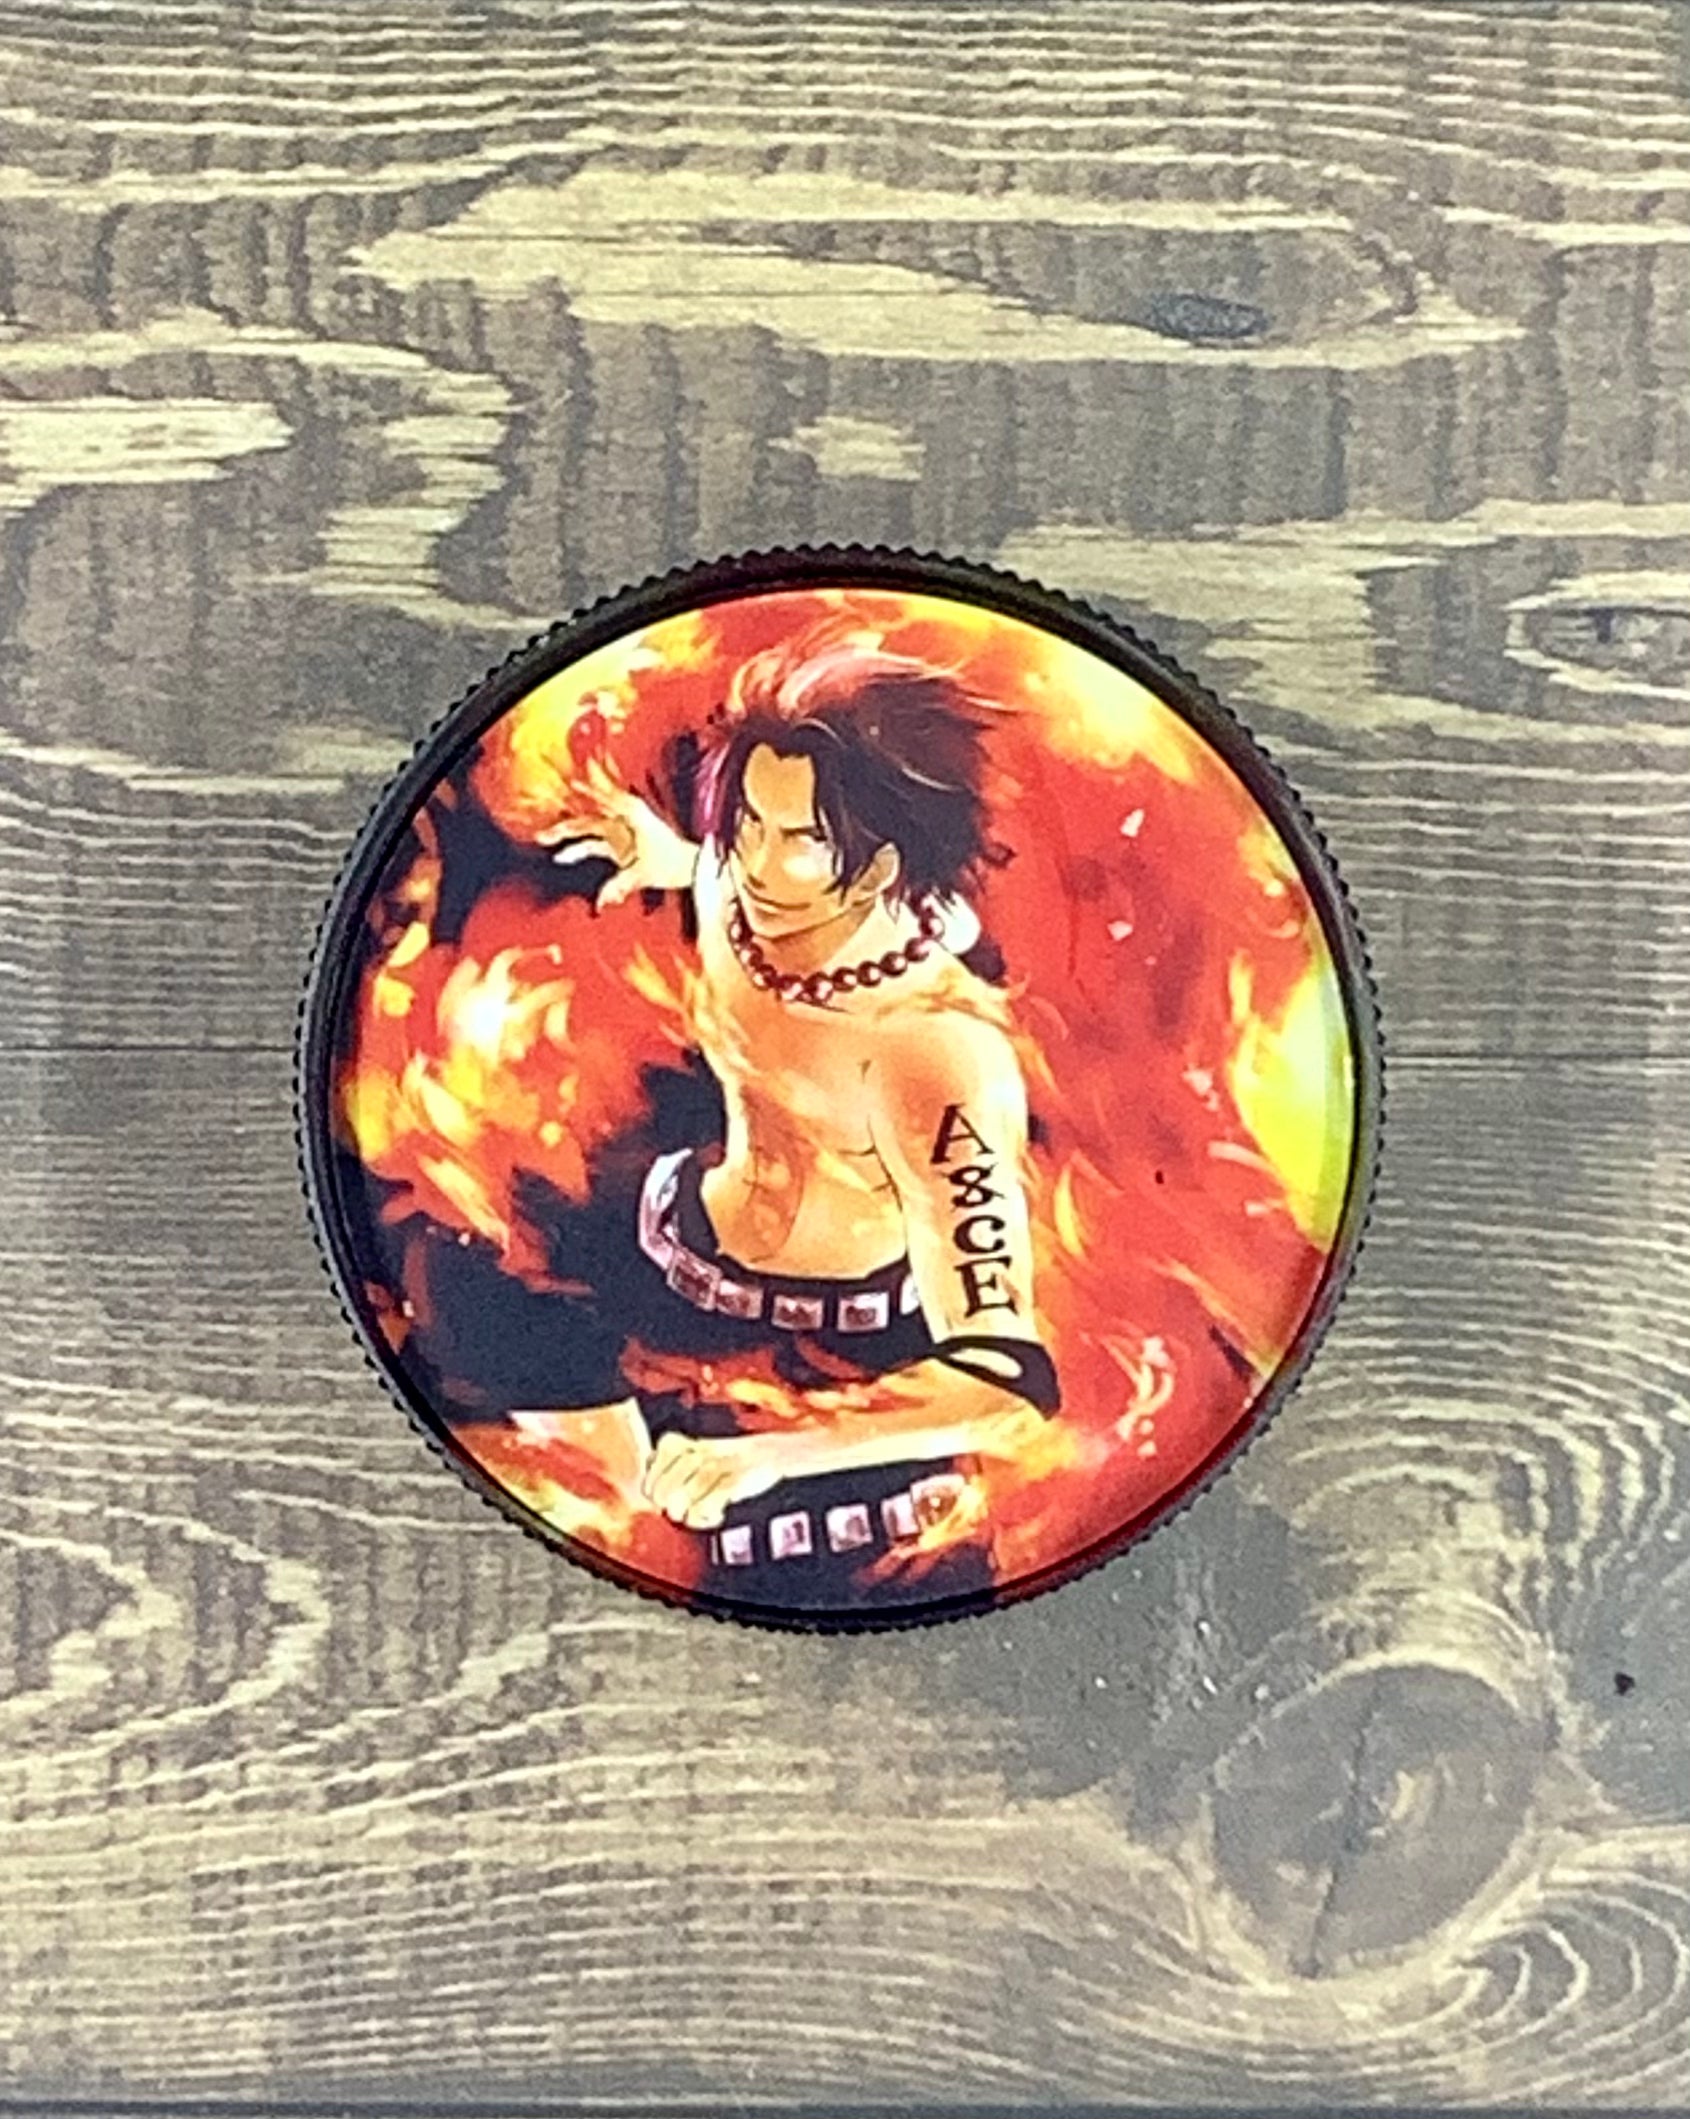 One Piece Character Small 2 Part Metal Grinder yoga smokes yoga studio, delivery, delivery near me, yoga smokes smoke shop, find smoke shop, head shop near me, yoga studio, headshop, head shop, local smoke shop, psl, psl smoke shop, smoke shop, smokeshop, yoga, yoga studio, dispensary, local dispensary, smokeshop near me, port saint lucie, florida, port st lucie, lounge, life, highlife, love, stoned, highsociety. Yoga Smokes Portgas D. Ace